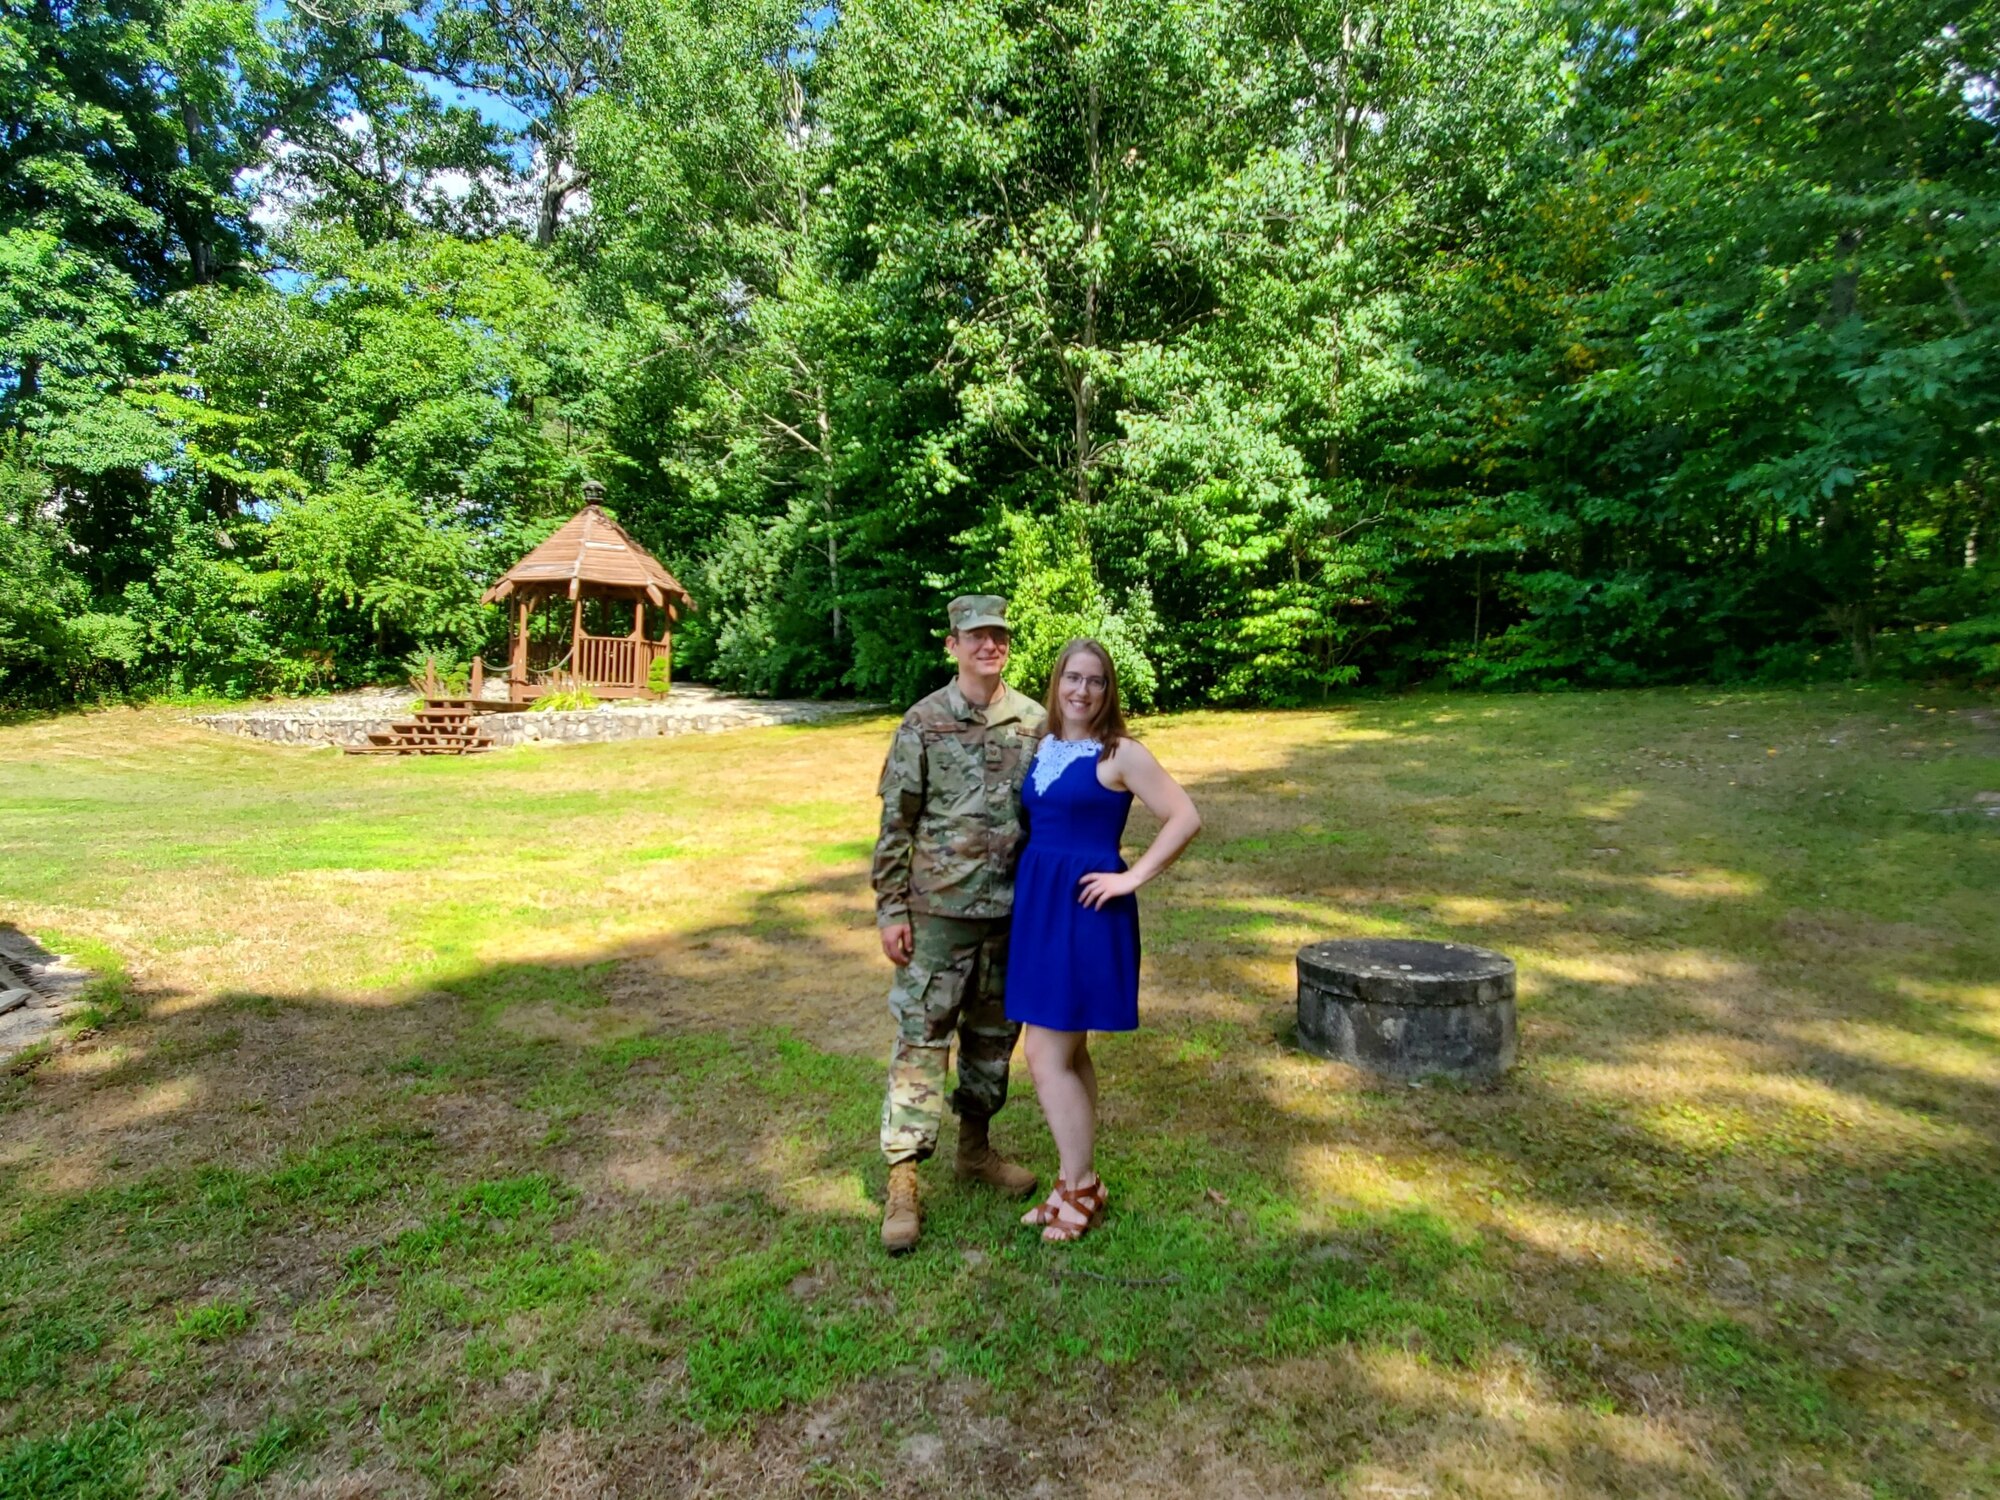 Tech. Sgt. George Seerden, 960th Cyberspace Operations Group NCO in charge of Standards and Evaluations, stands next to his significant other, Janelle, in his backyard Aug. 1, 2020, Johnston, Rhode Island. (Courtesy photo by Justine Boucher)